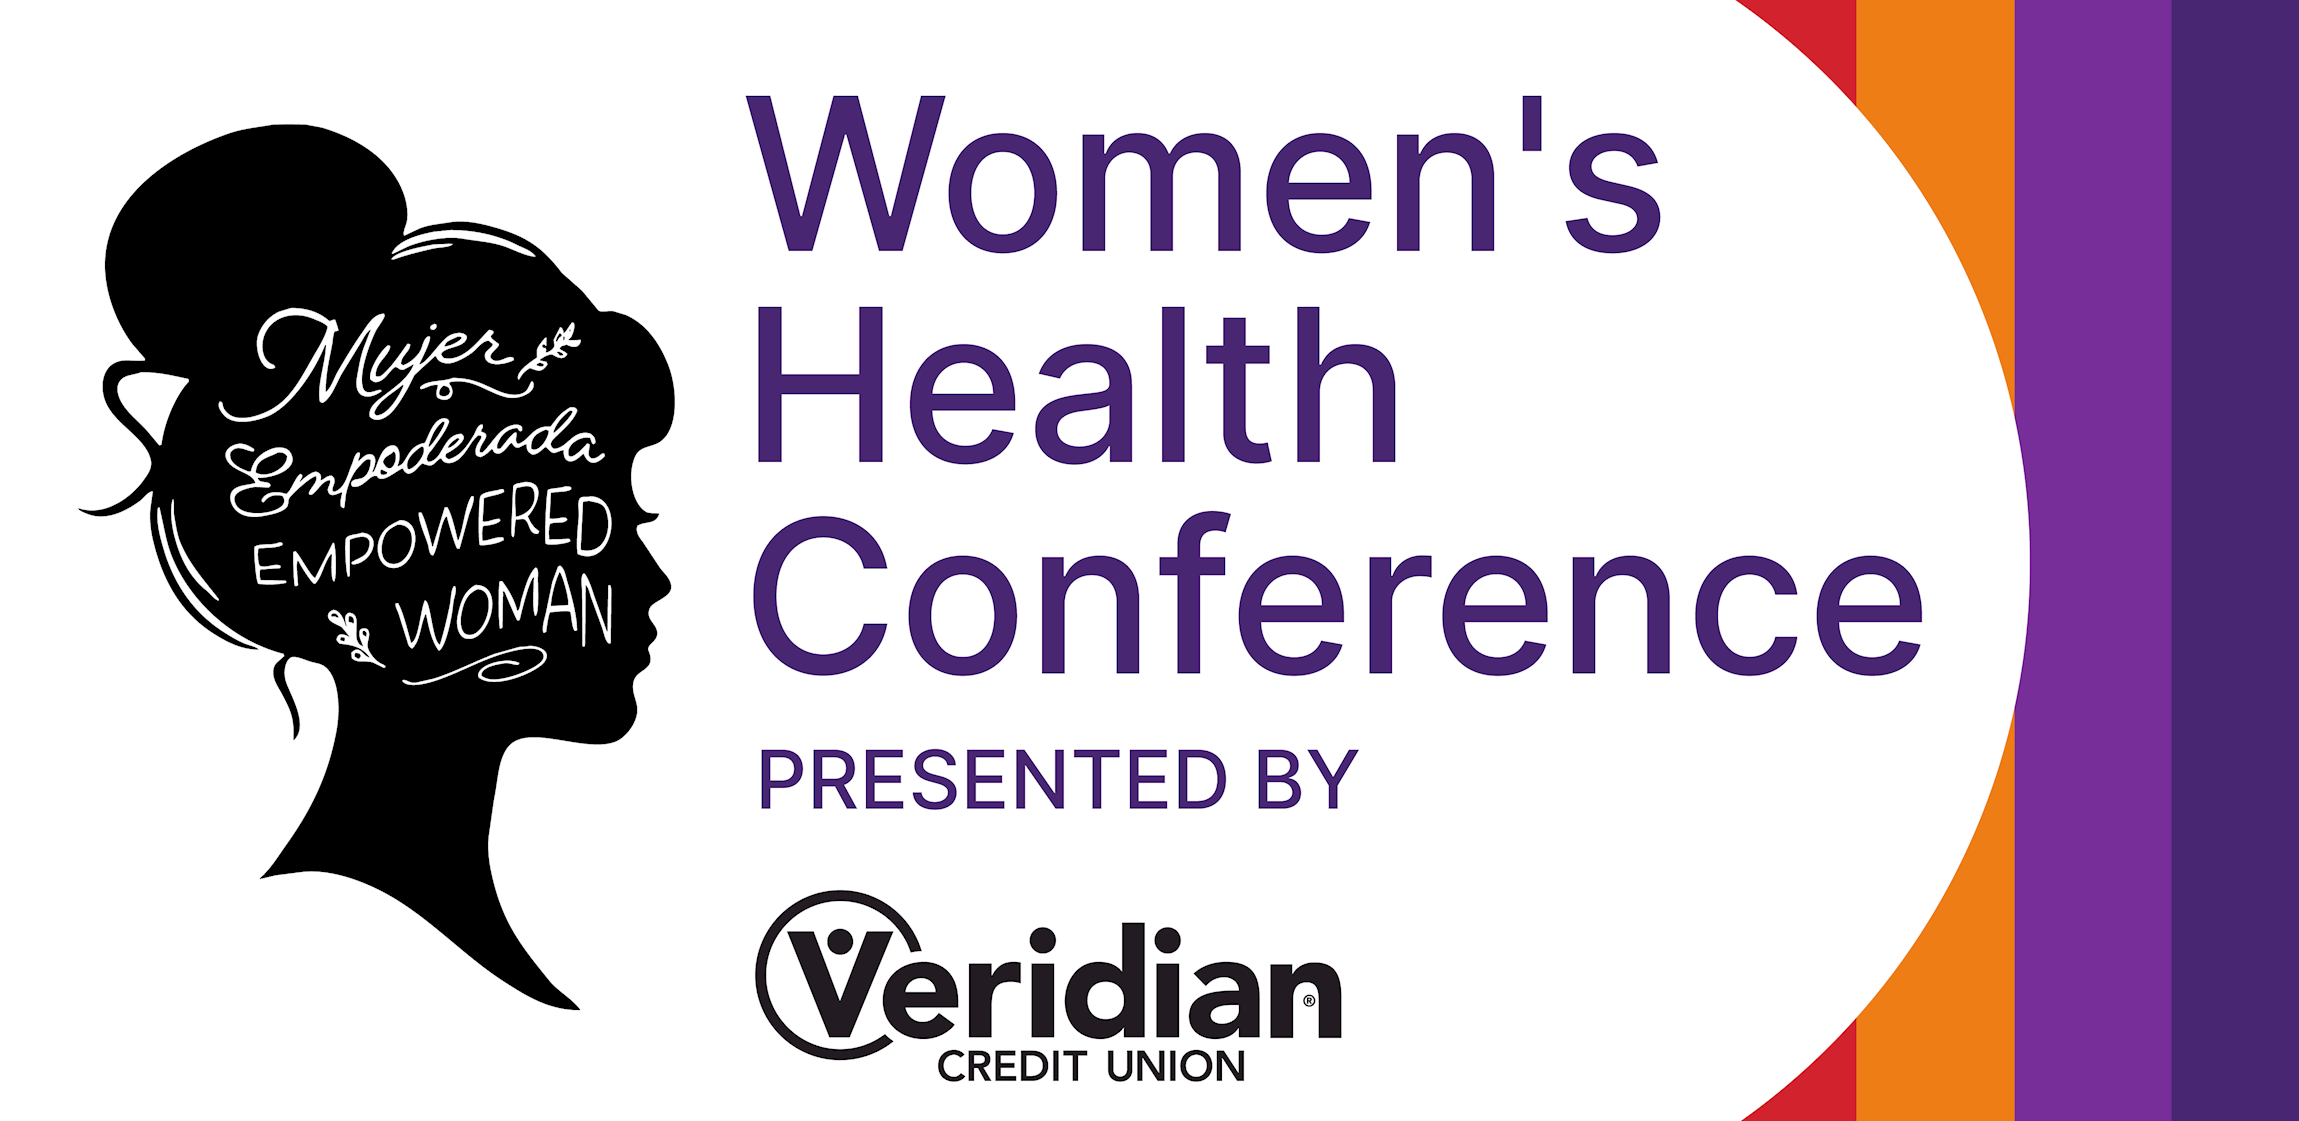 Women's Health Conference